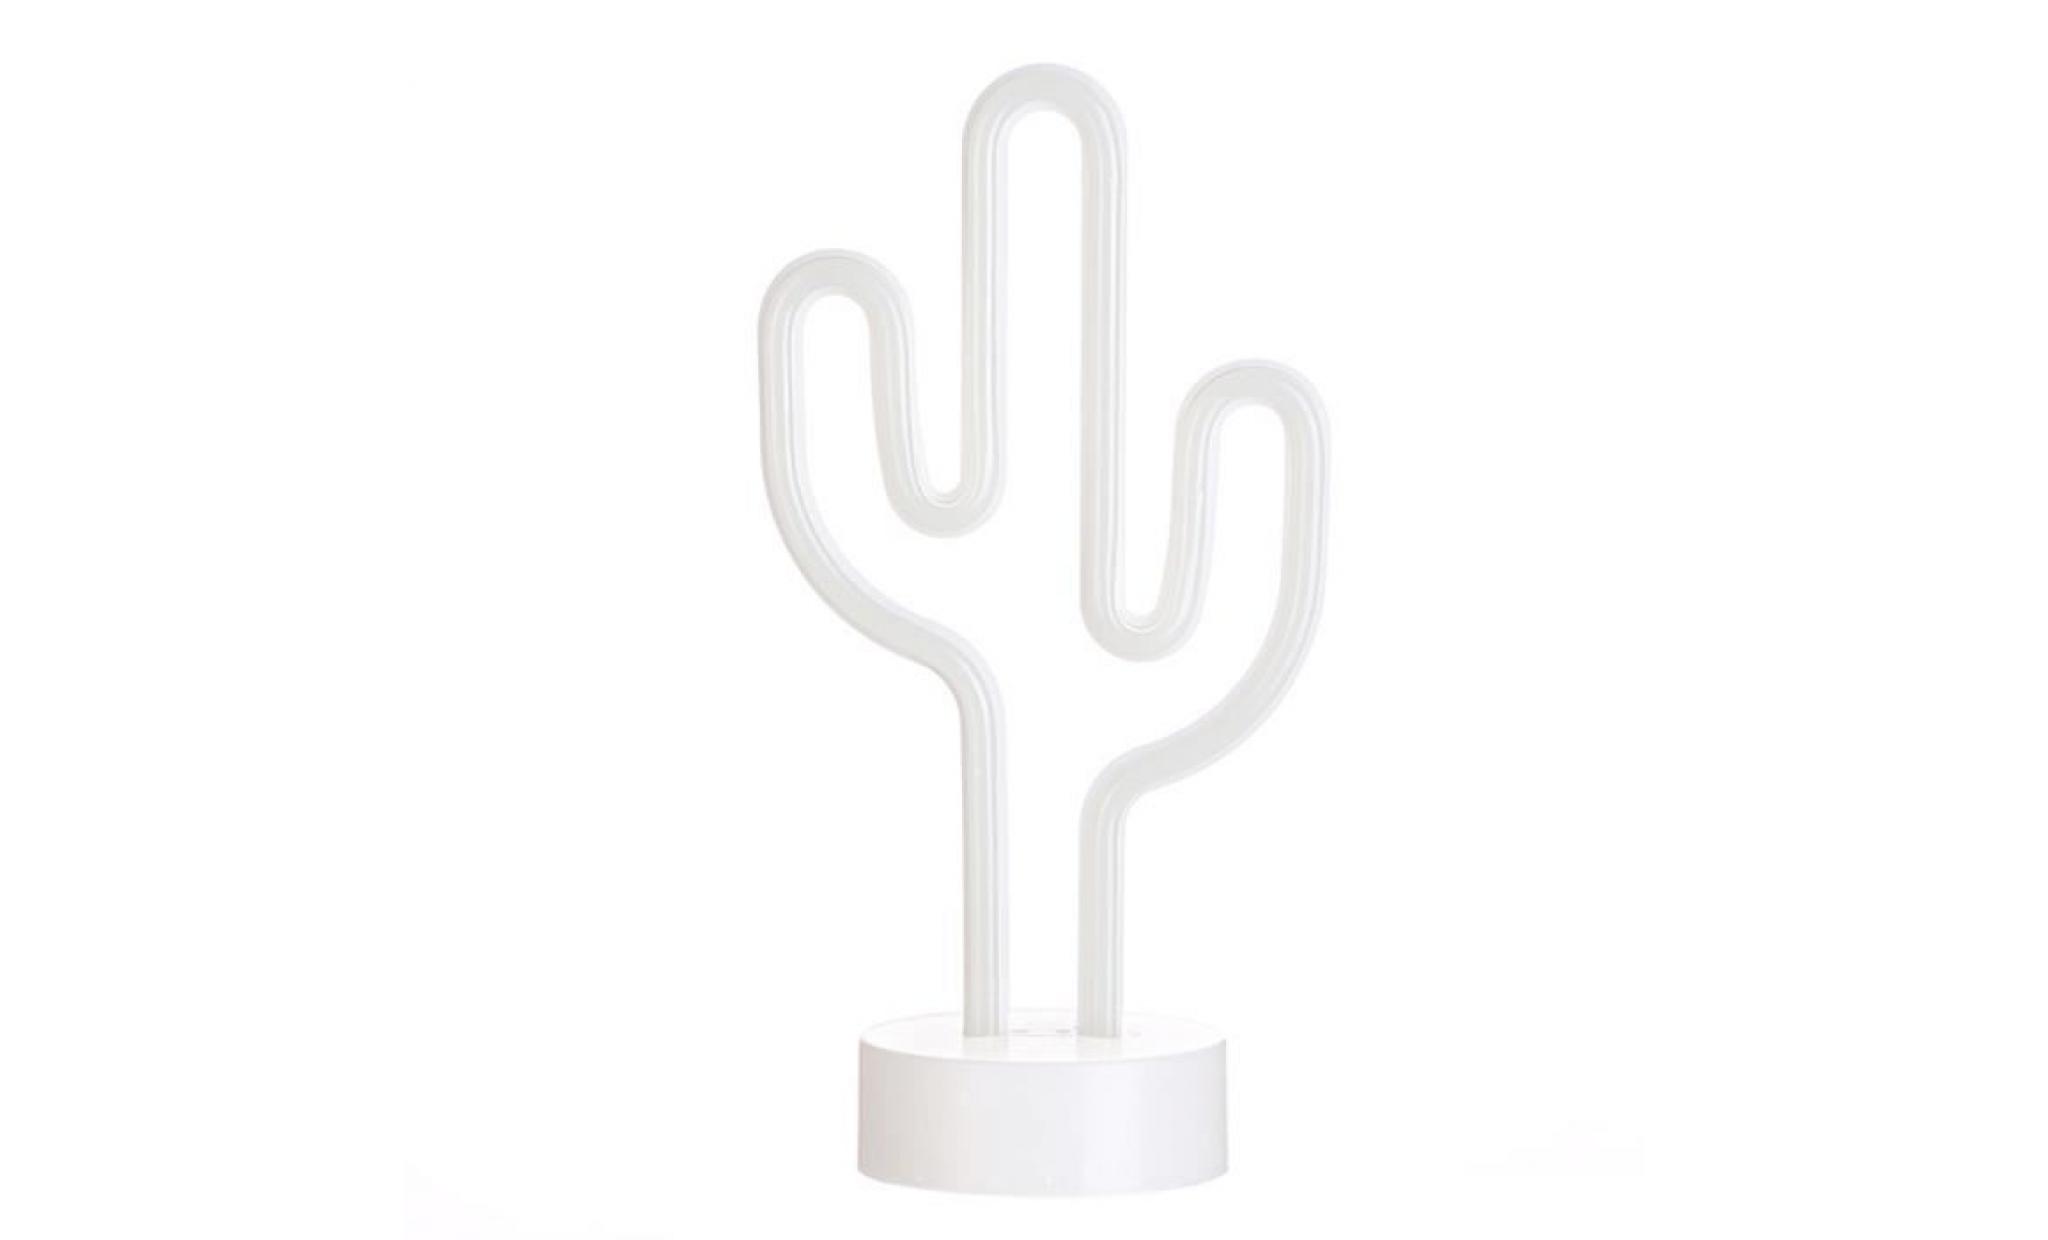 marquee led night light chambre cactus home décor batterie lampe mur yt2598